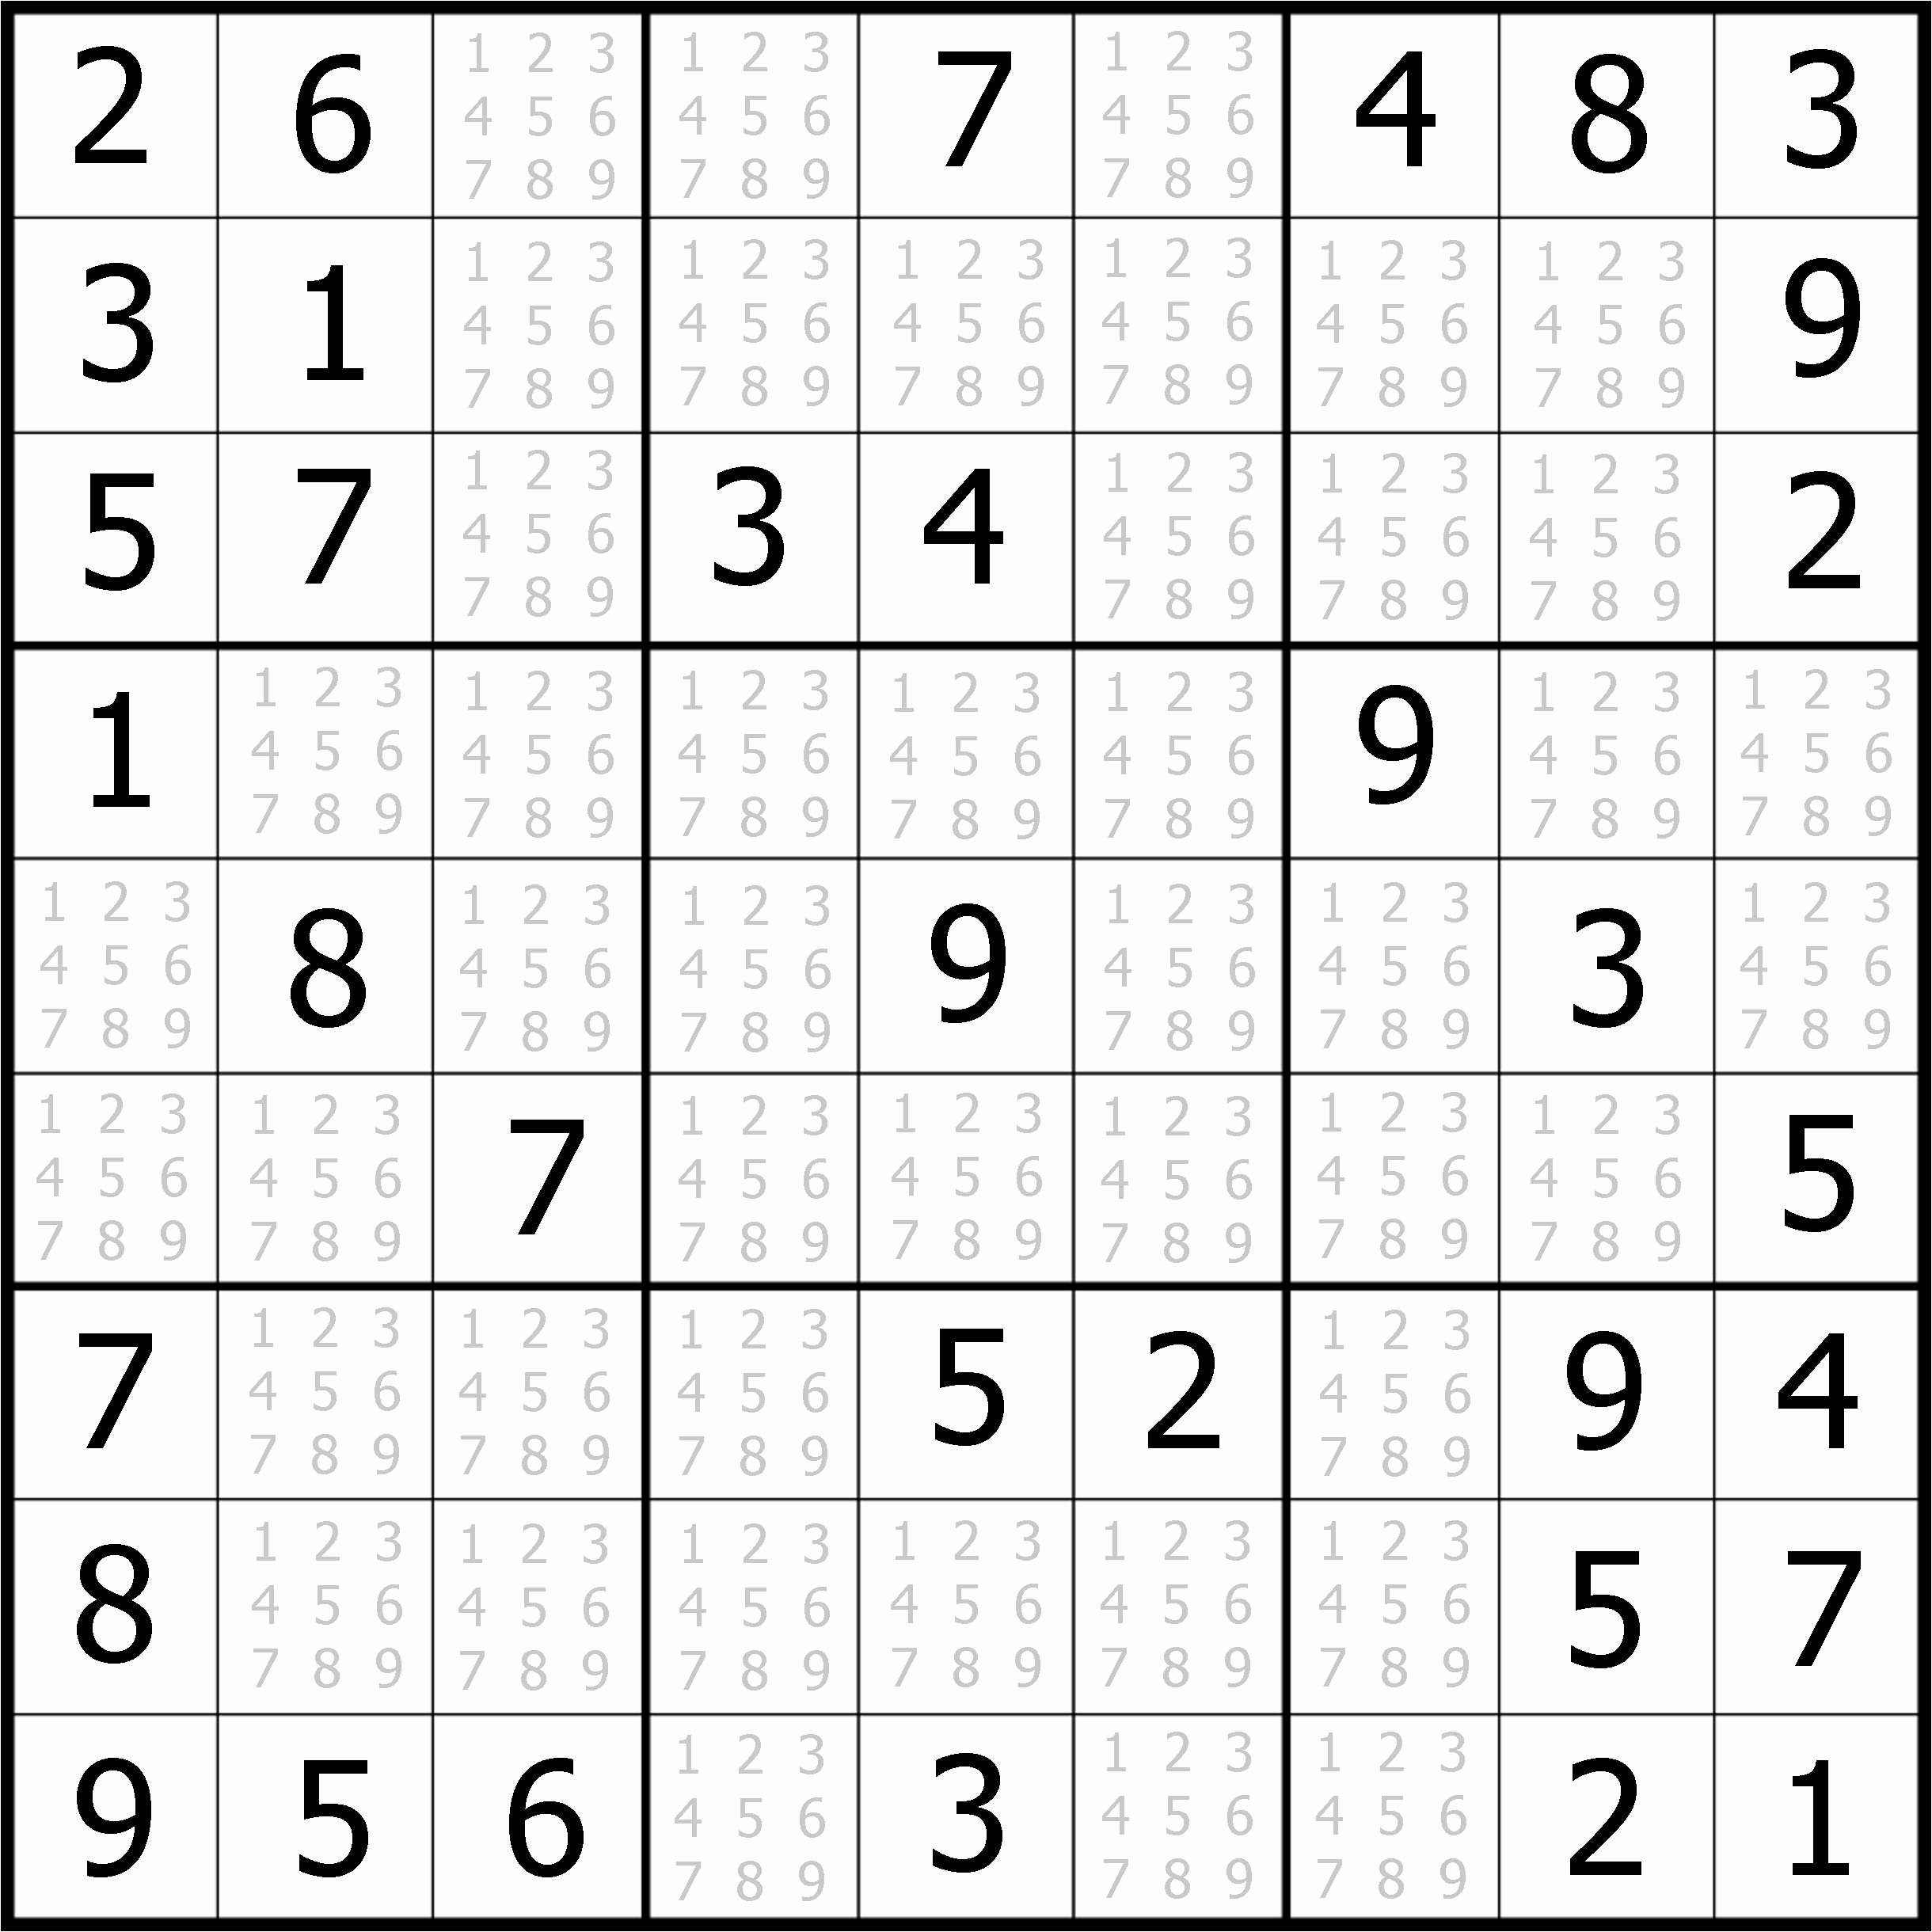 Easy Sudoku Puzzles To Print Free Download Featured Sudoku Puzzle To - Printable Sudoku Puzzles For Adults